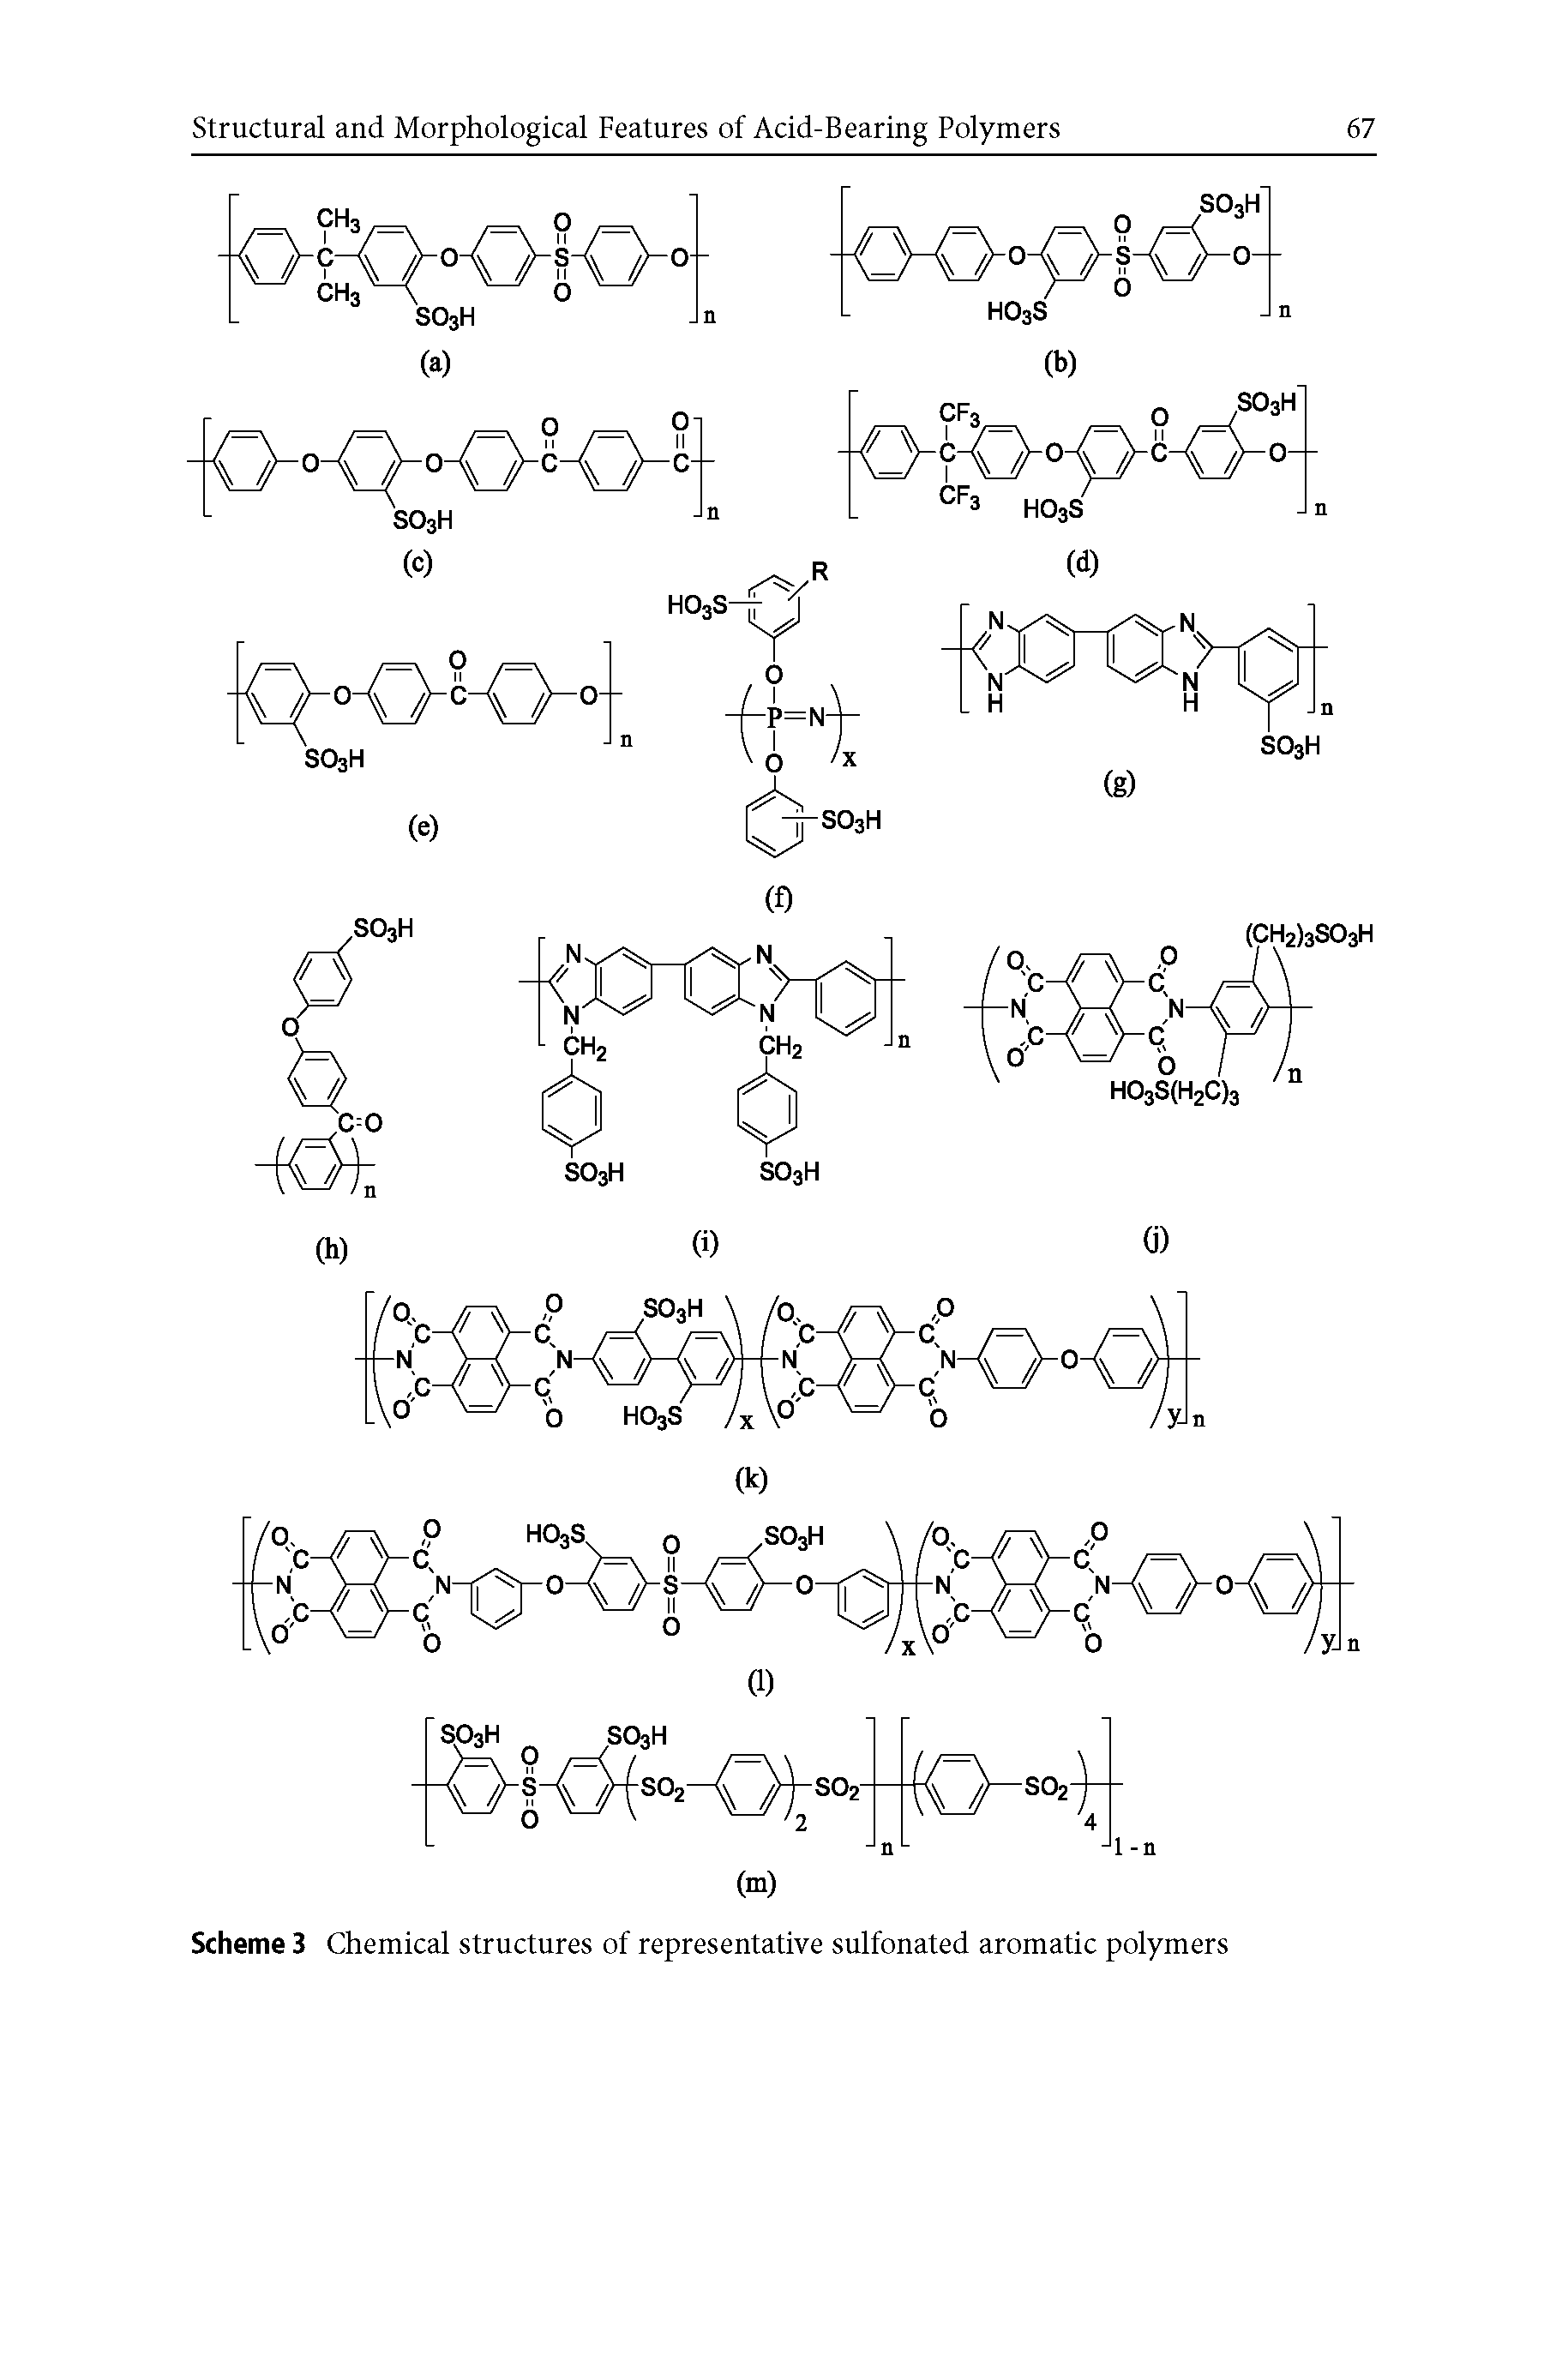 Scheme 3 Chemical structures of representative sulfonated aromatic polymers...